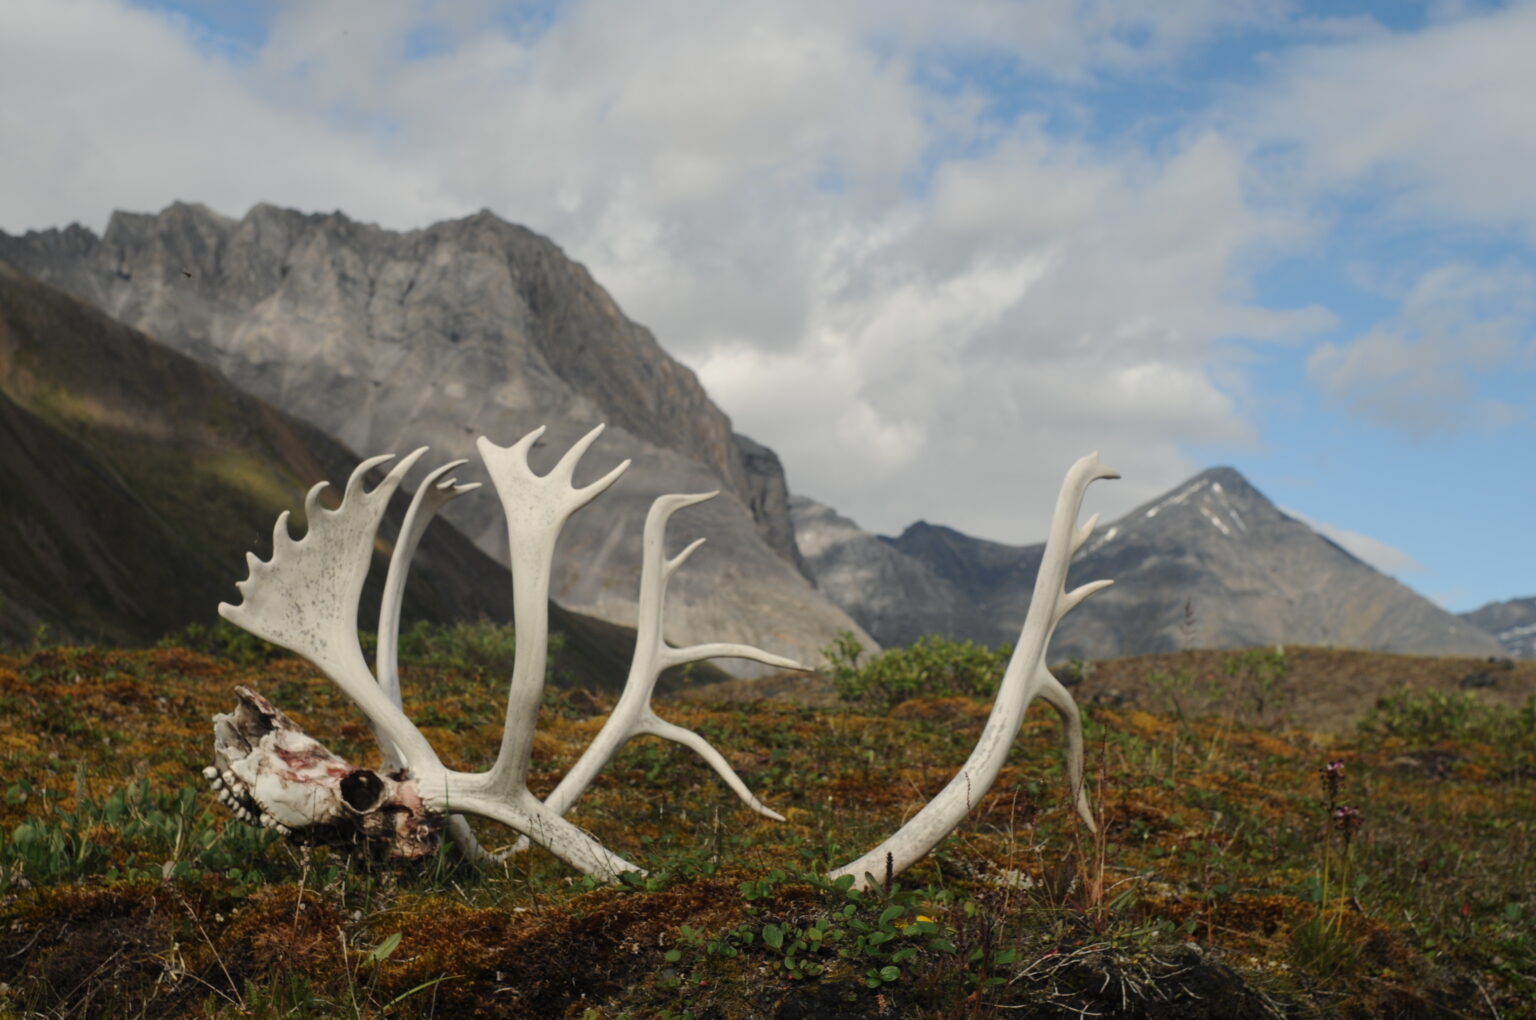 antlers and a skull in the tundra, with mountains in the background